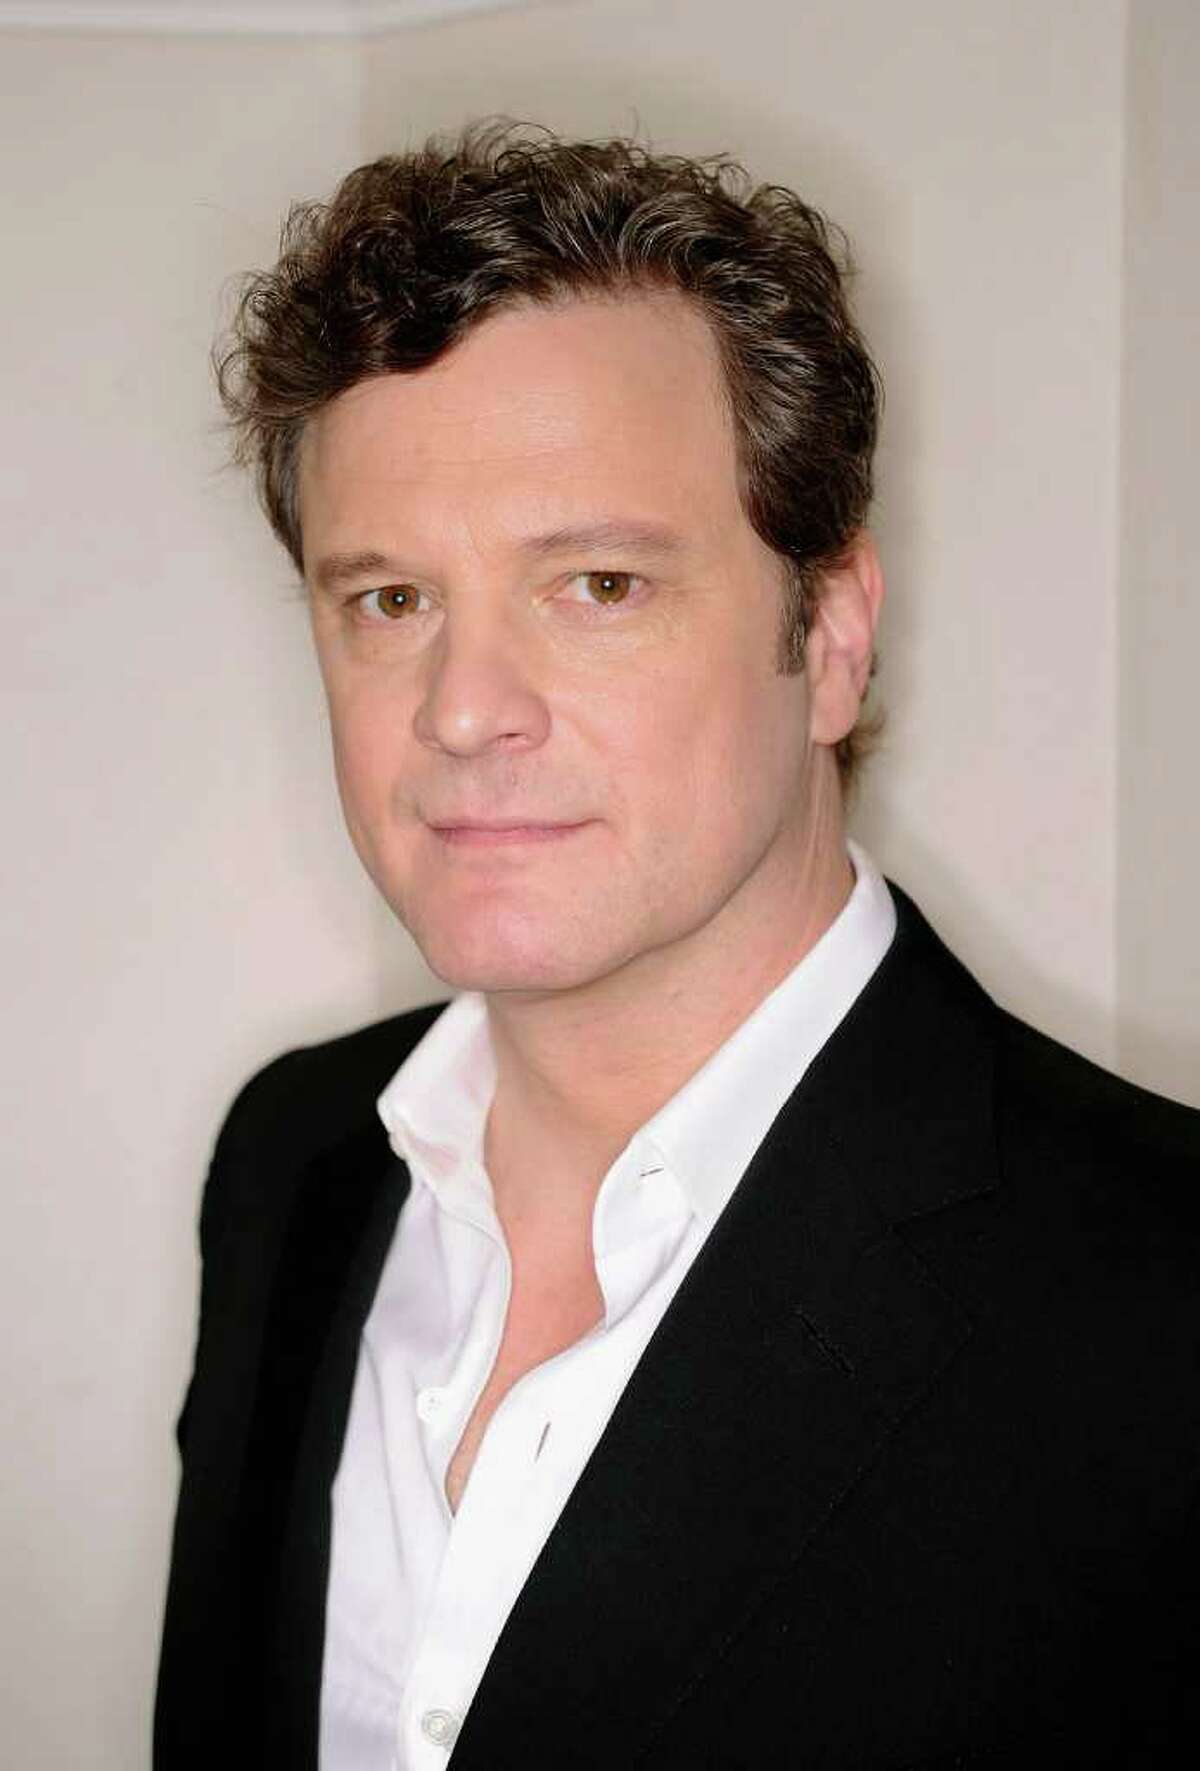 DUBAI, UNITED ARAB EMIRATES - DECEMBER 13: Actor Colin Firth during a portrait session at the 7th Annual Dubai International Film Festival held at the Madinat Jumeriah Complex on December 13, 2010 in Dubai, United Arab Emirates. (Photo by Andrew H. Walker/Getty Images For Dubai International Film Festival) *** Local Caption *** Colin Firth